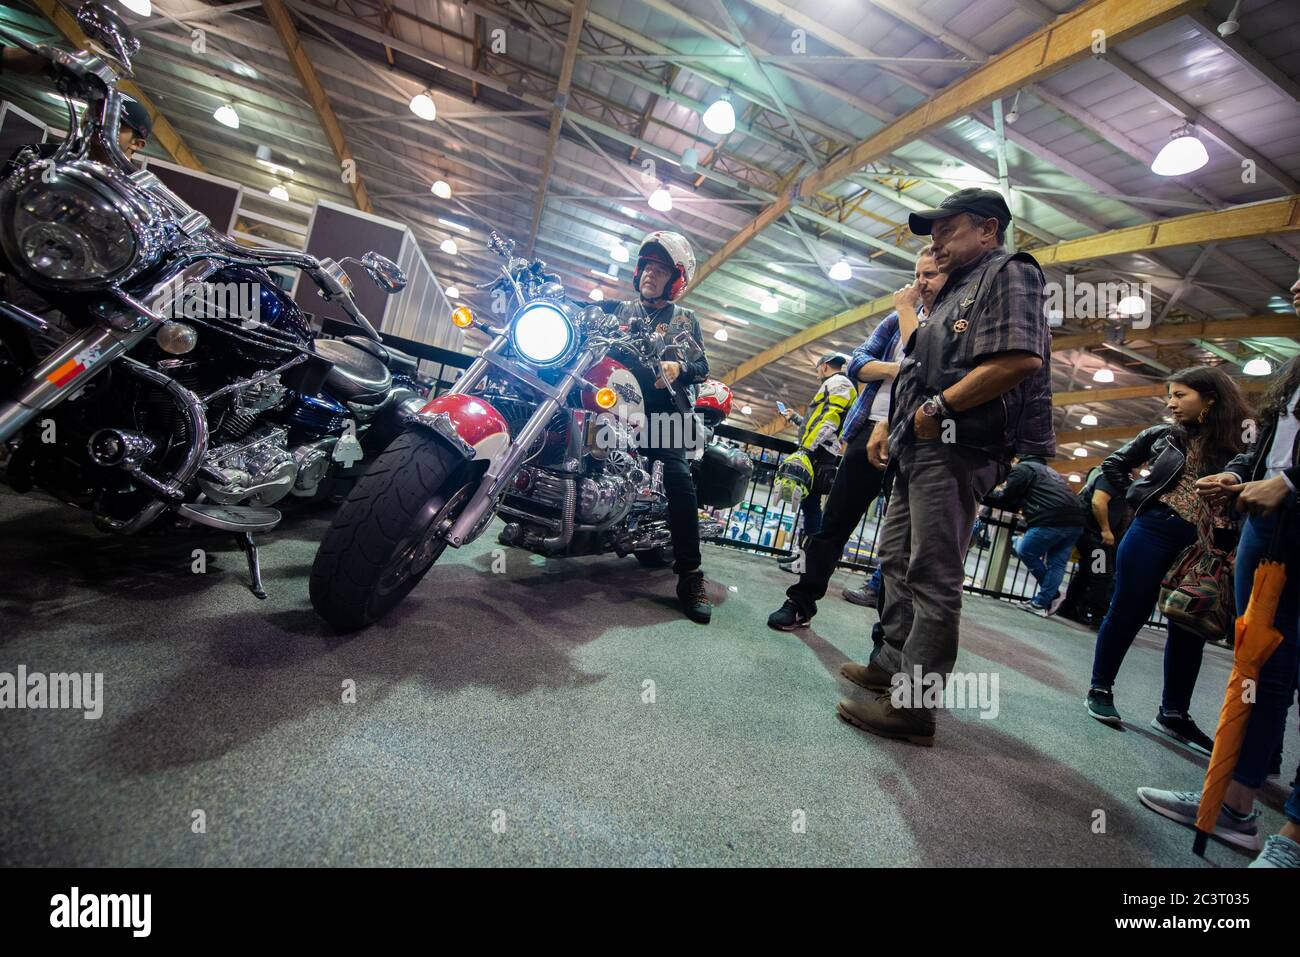 Classic Harley Davidson showroom inside of motoGO fair. This fair happens every two years and gathers fans and enthusiasts of motorcycles in Colombia. Stock Photo